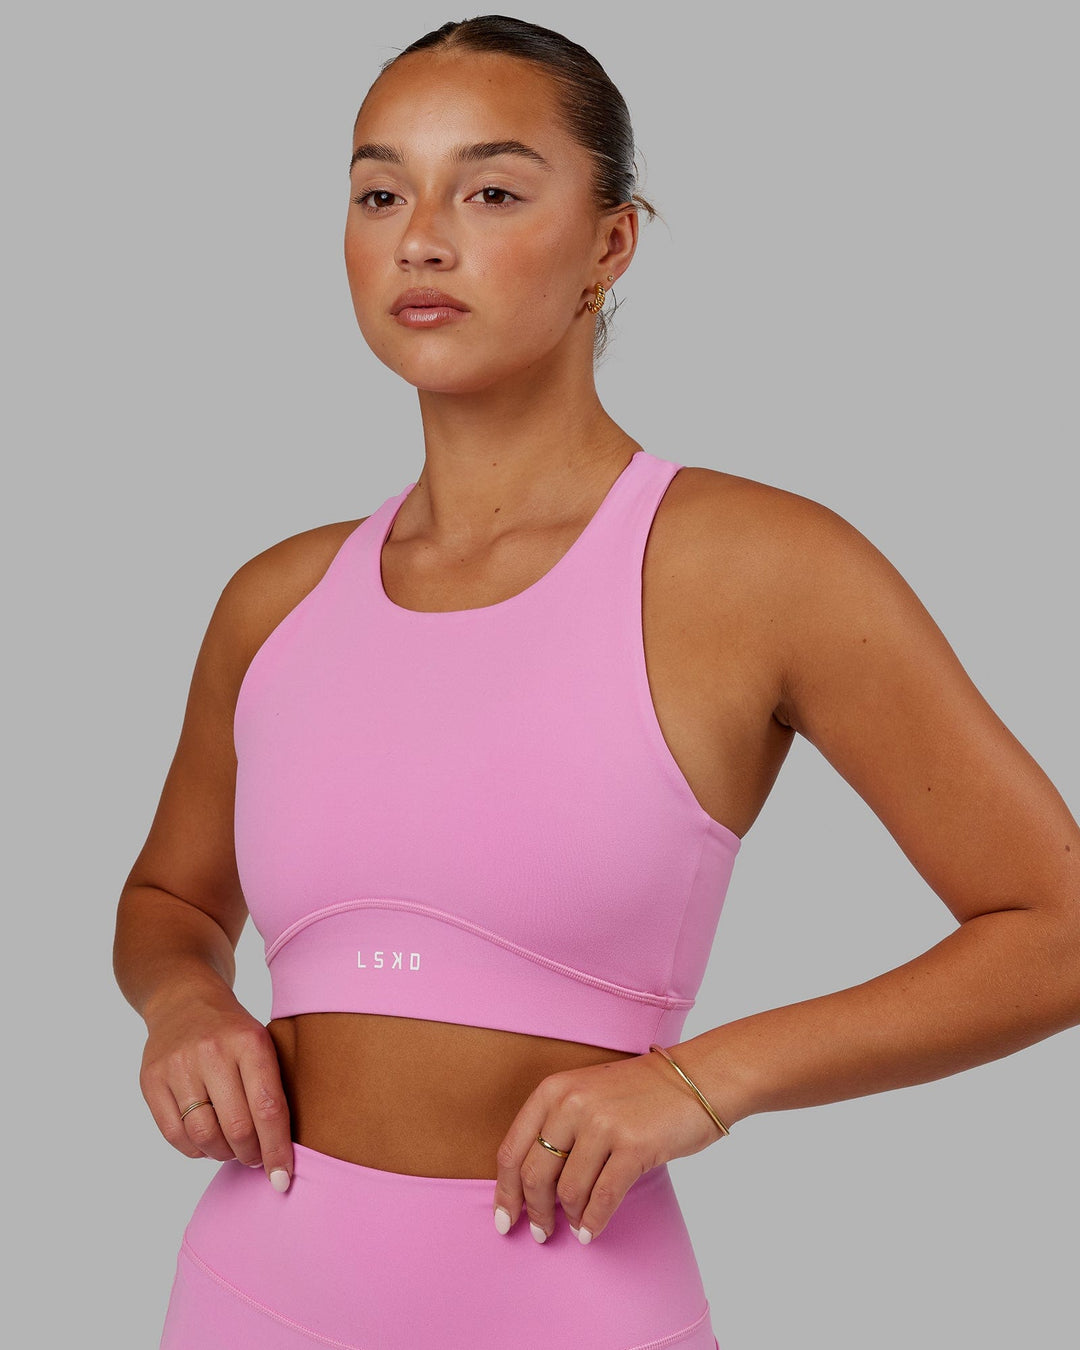 Woman Wearing Fusion Sports Bra - Spark Pink